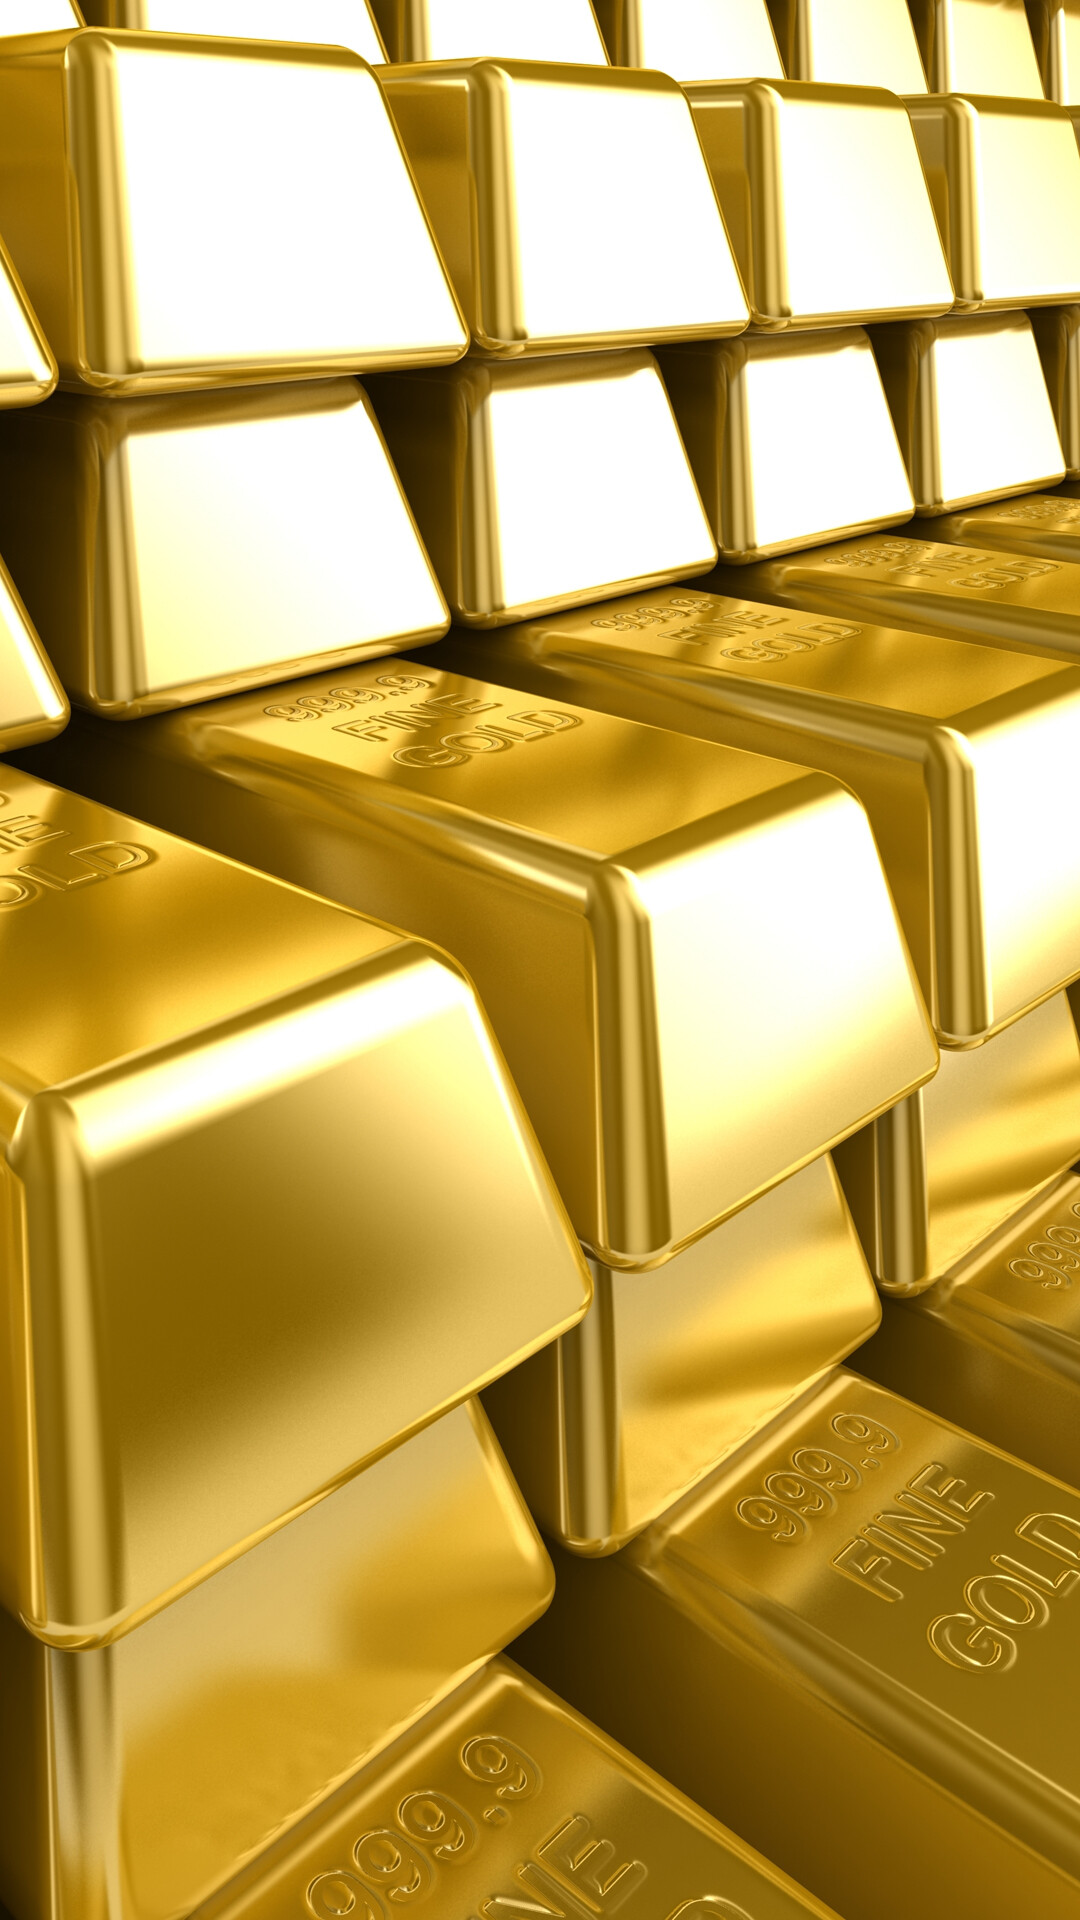 Gold: Gold bullions with a 999.9 millesimal fineness, The pile of shiny gold bars, Symmetry. 1080x1920 Full HD Wallpaper.